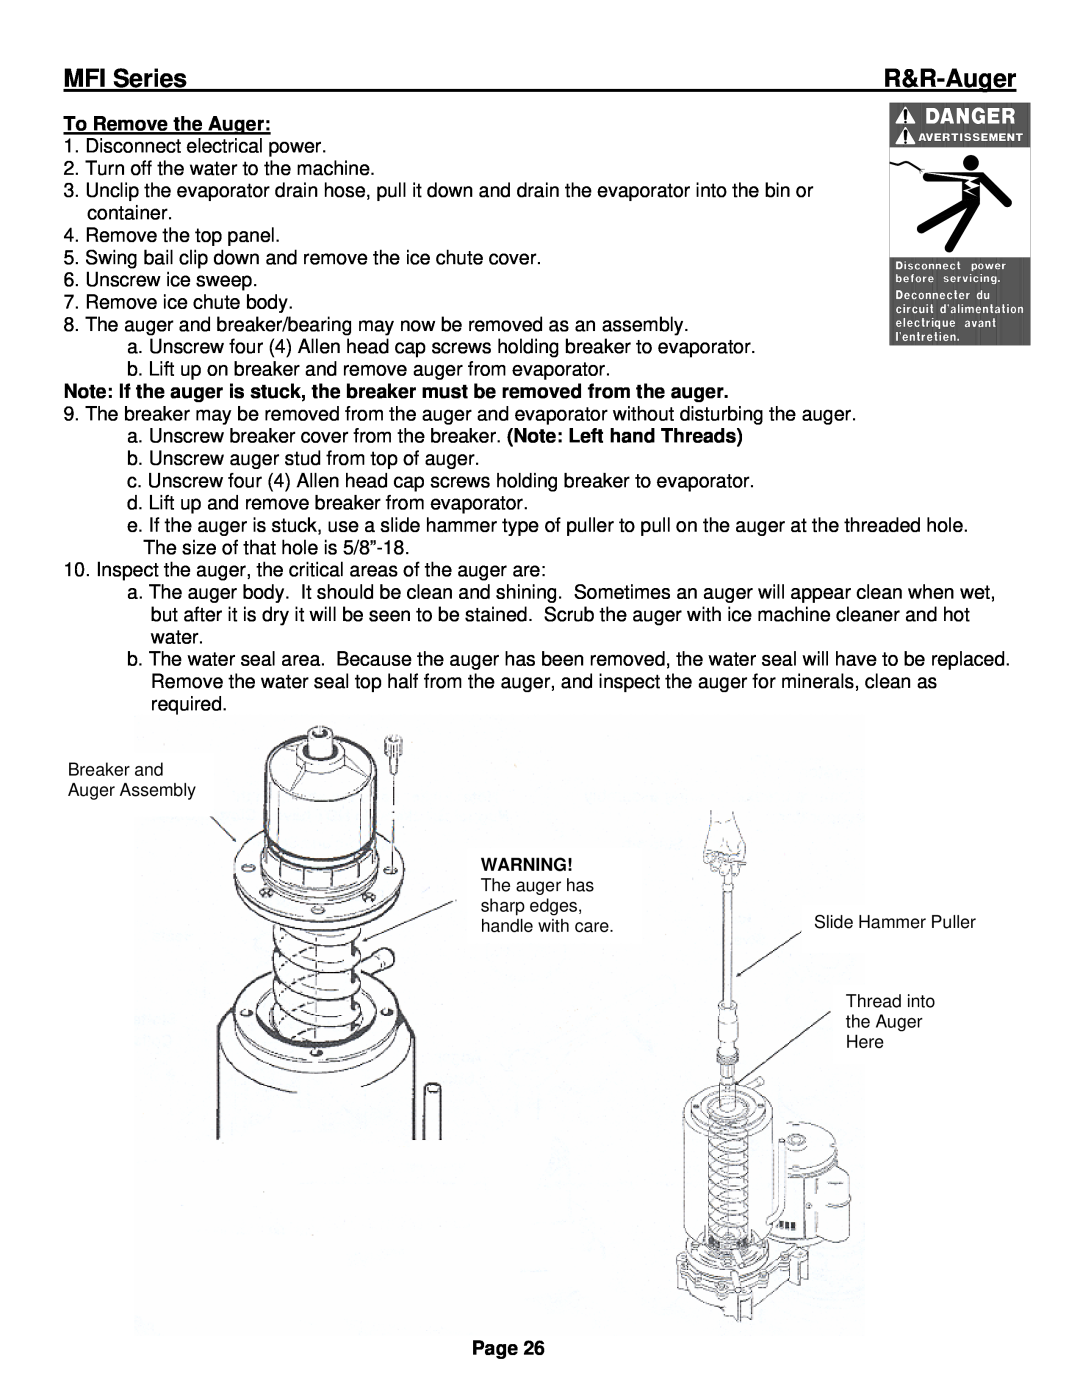 Ice-O-Matic installation manual R&R-Auger, To Remove the Auger, MFI Series, Page 